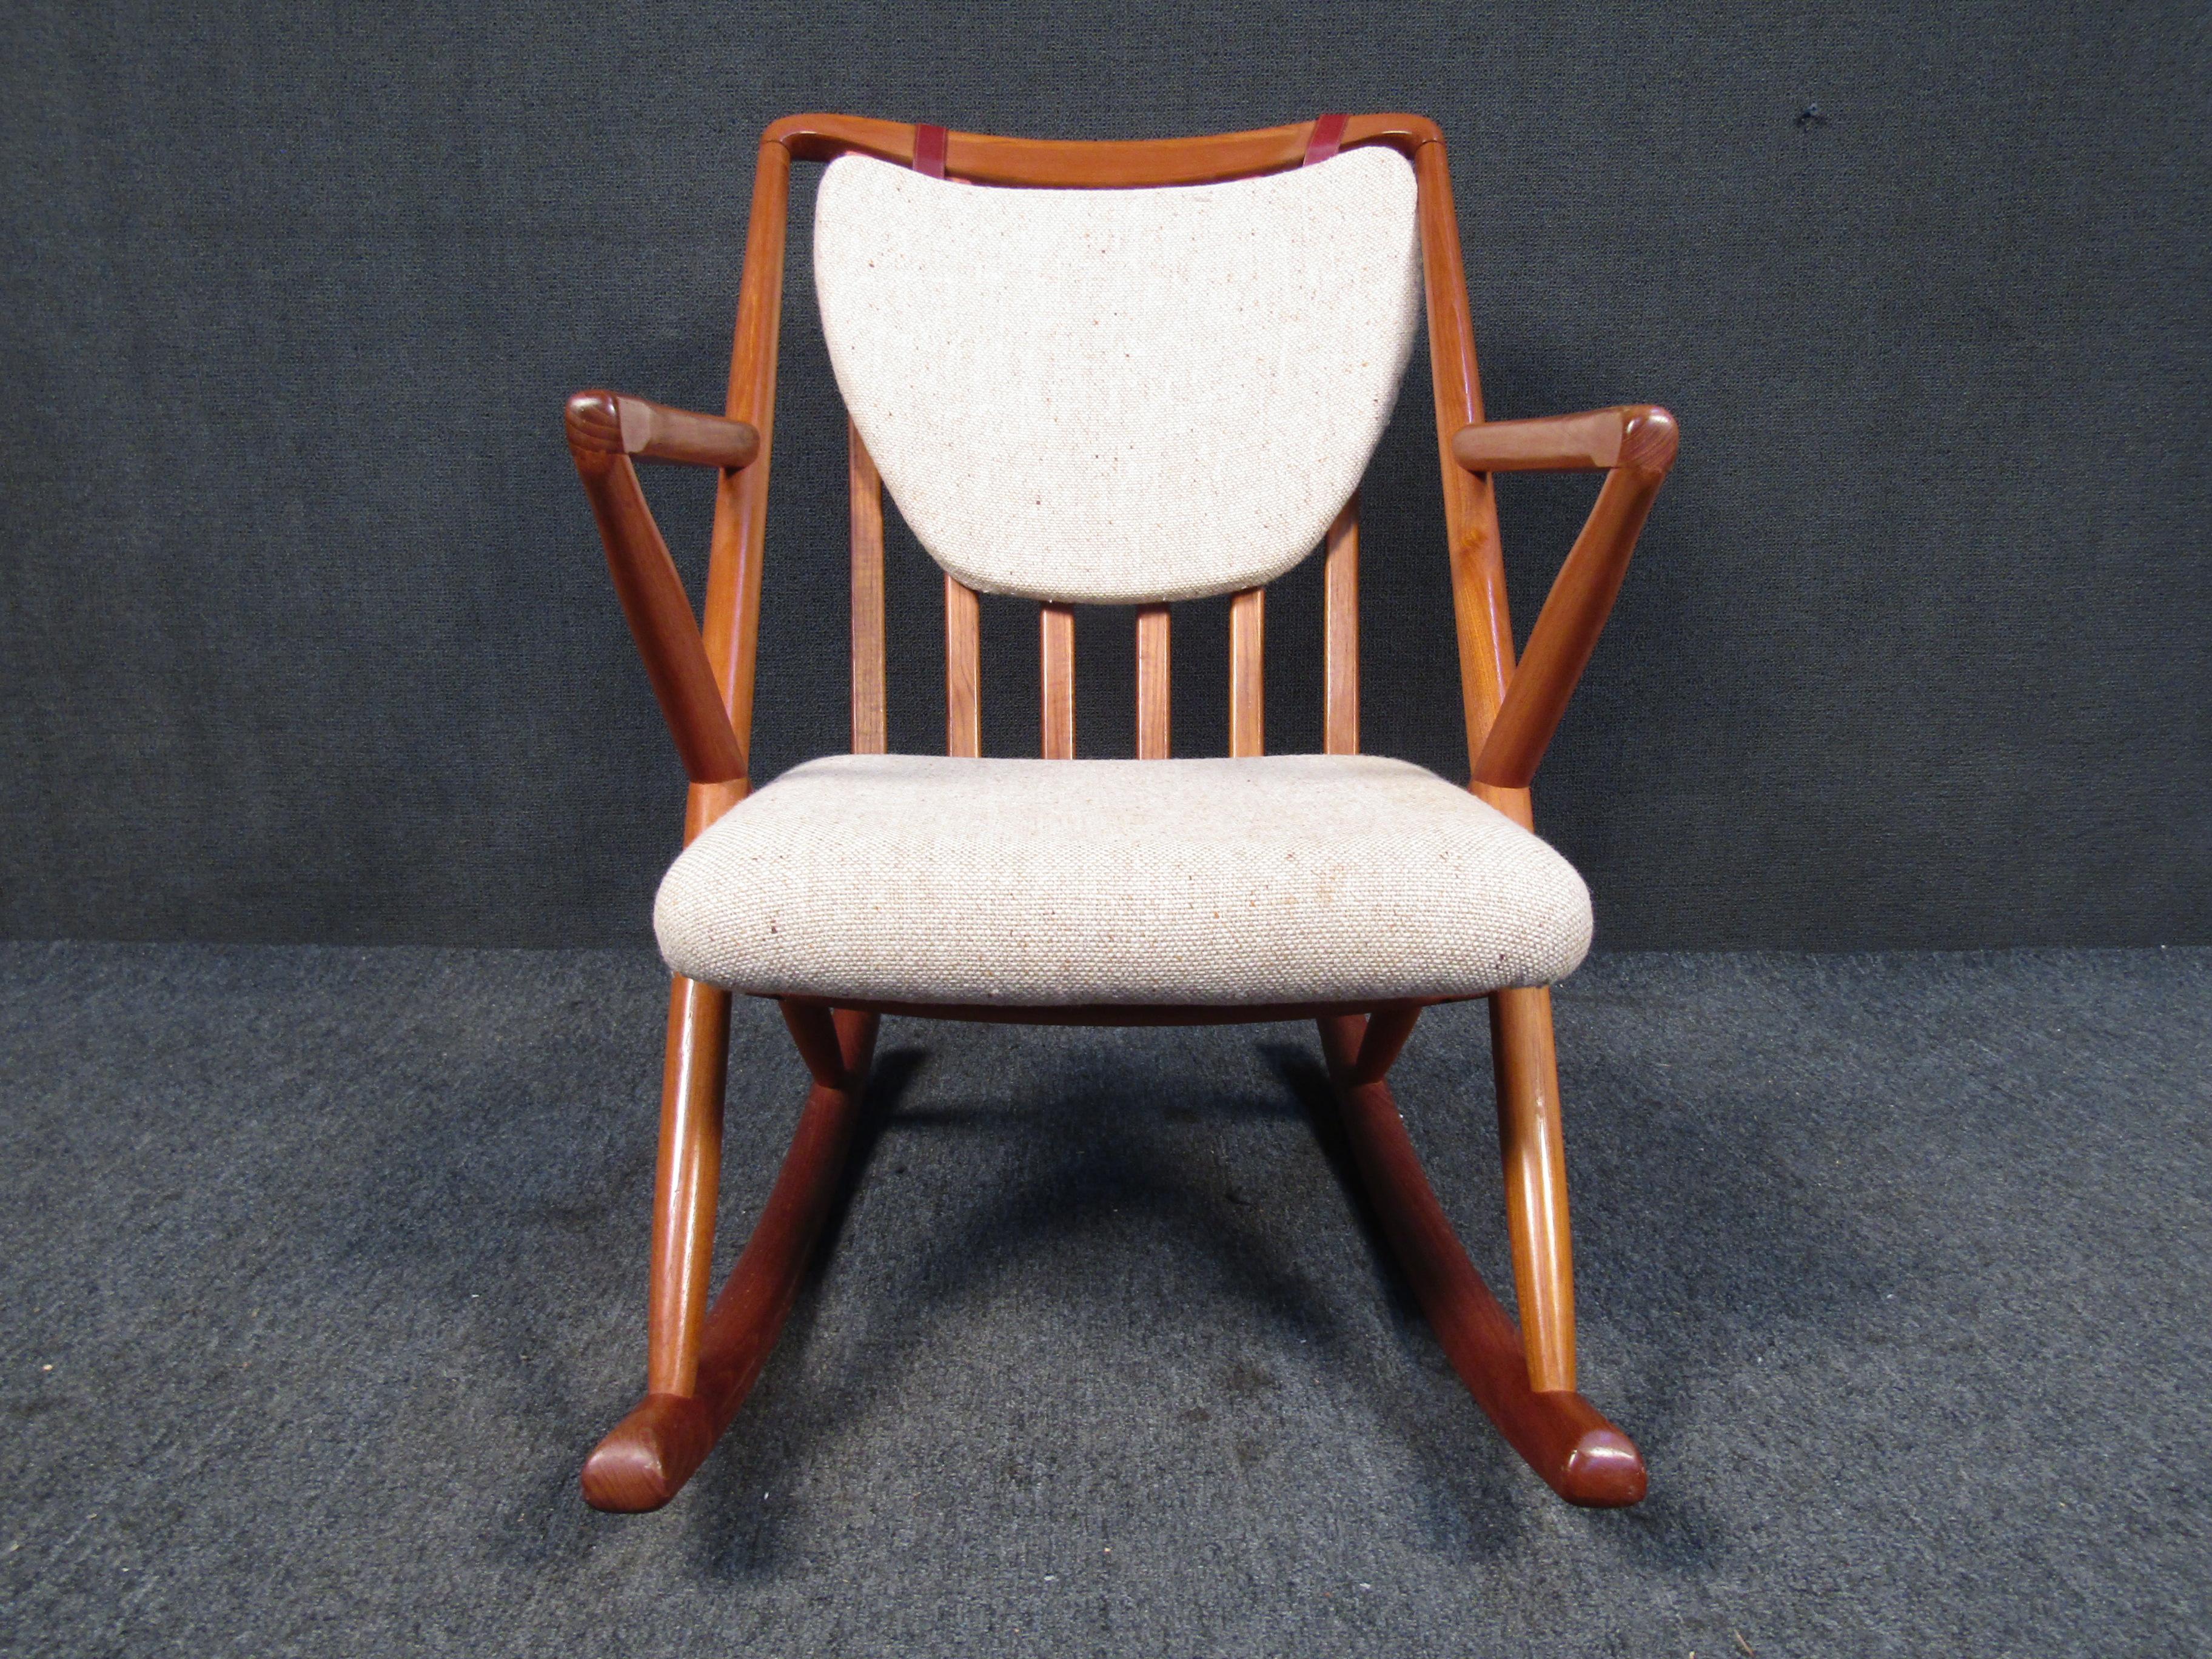 With an elegant design and spindle back, this vintage Danish rocker in the style of Benny Linden is full of Mid-Century Modern style. Please confirm item location with seller (NY/NJ).